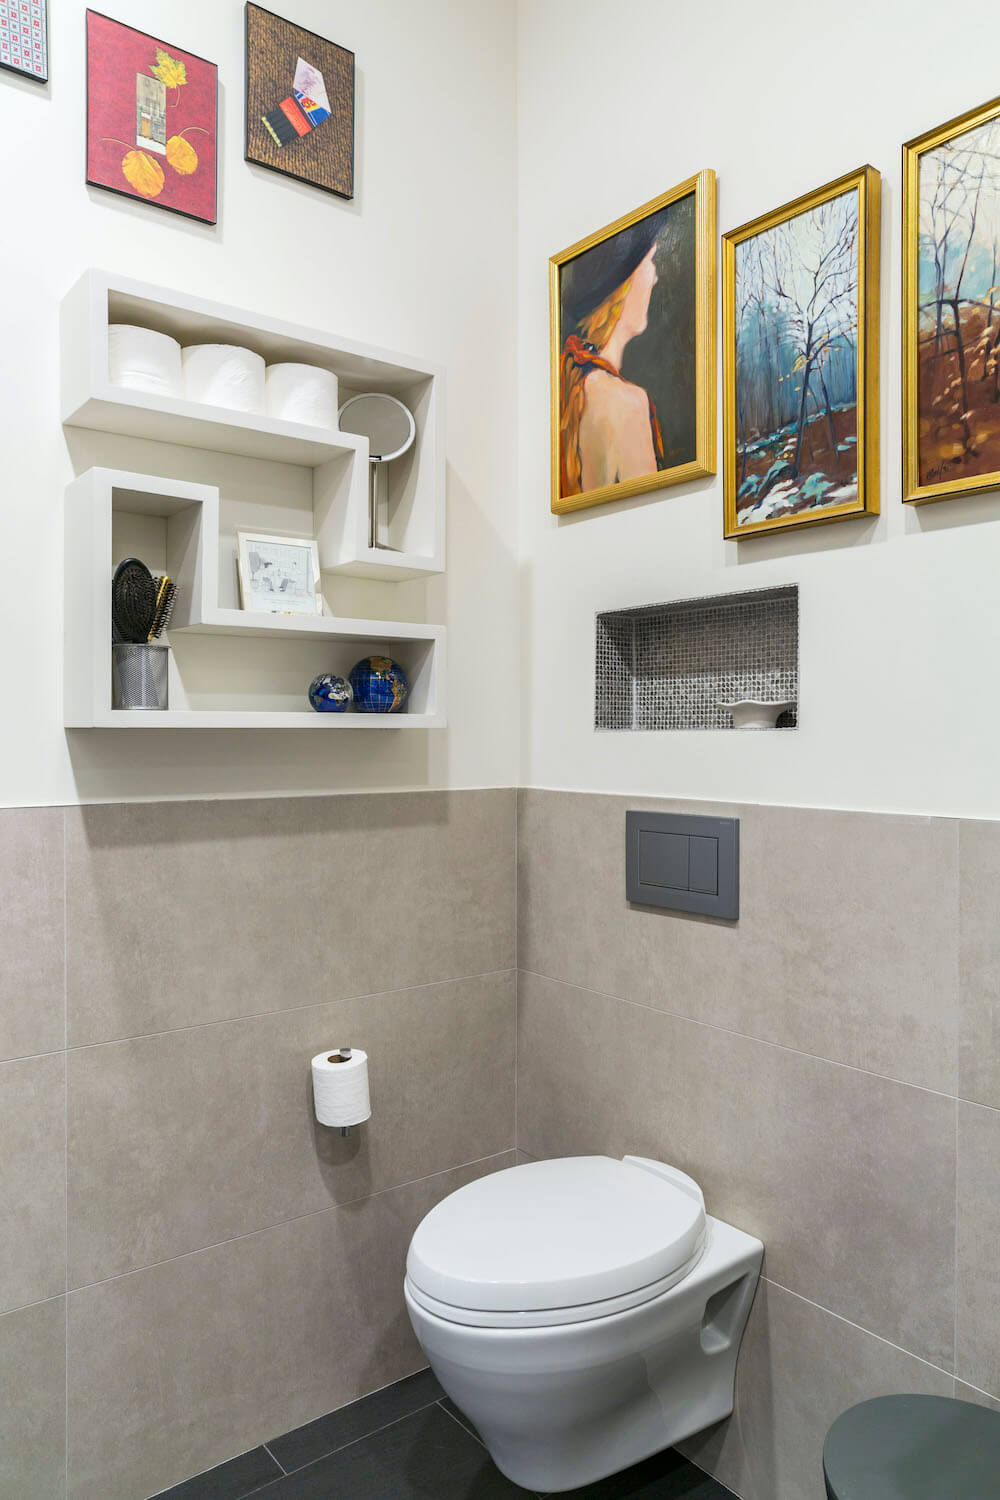 Image of a wall hung toilet surrounded by art collection